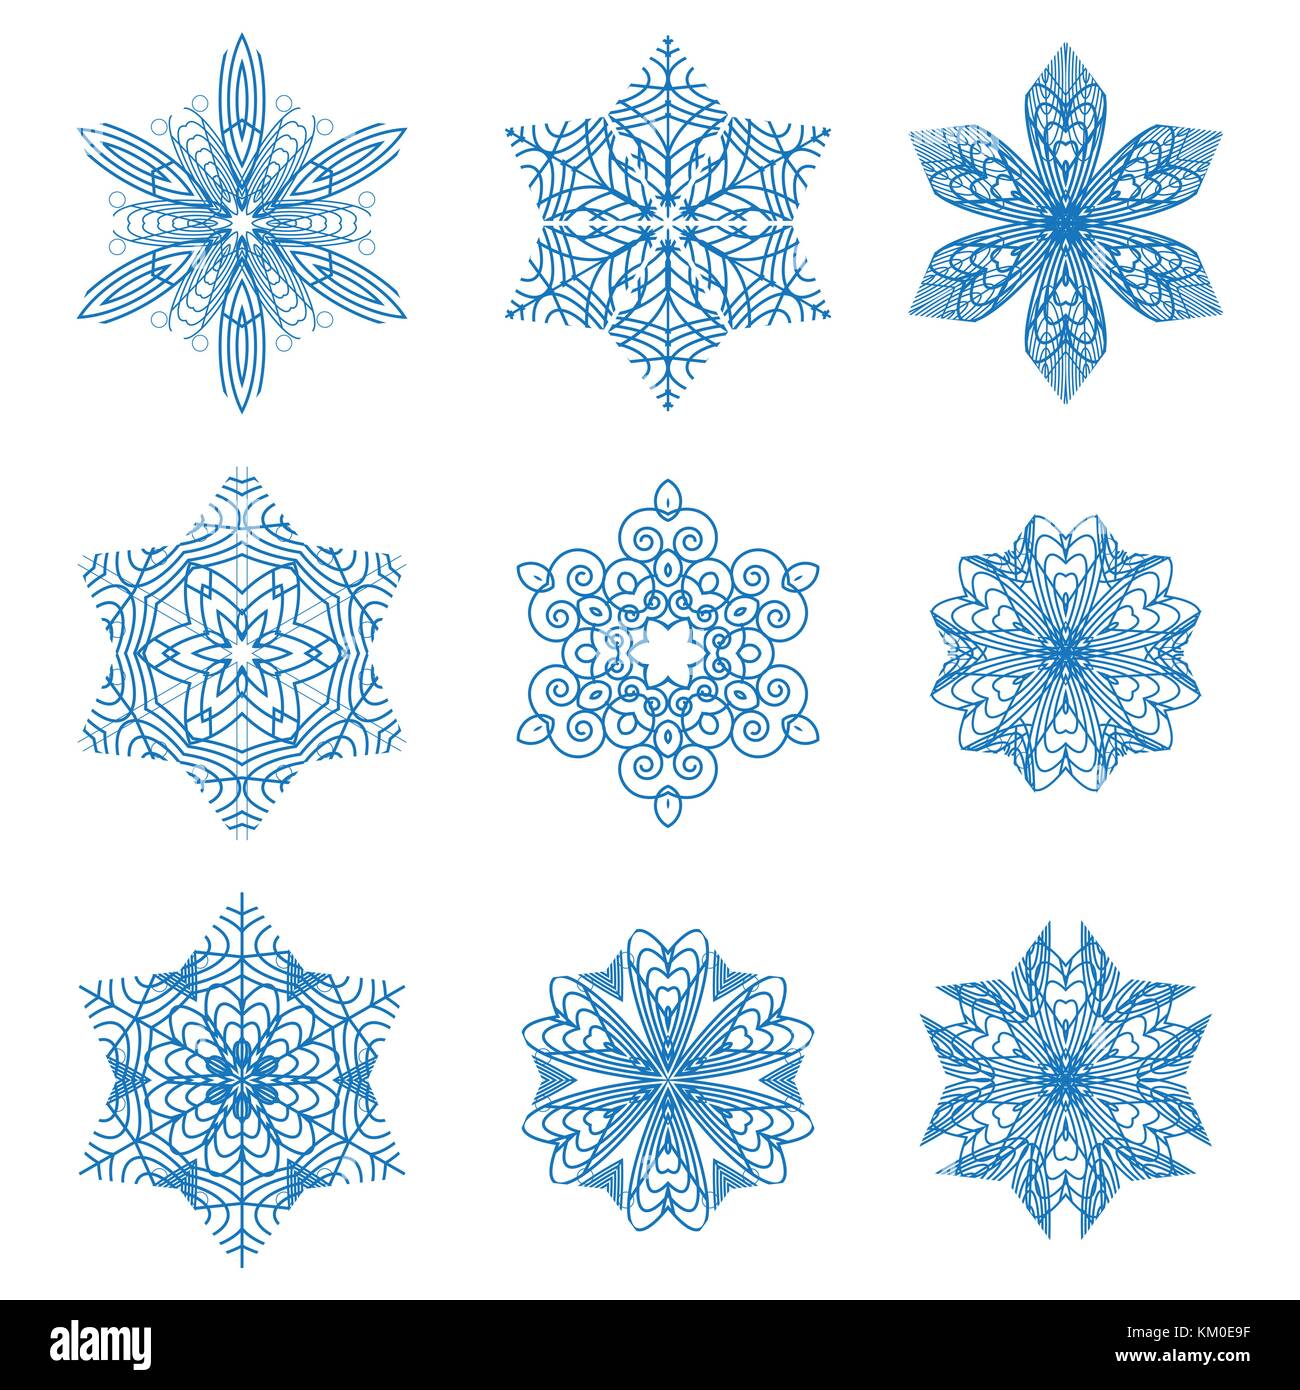 Star symbol graphic, crystal, frozen decoration, snowflakes Stock Vector